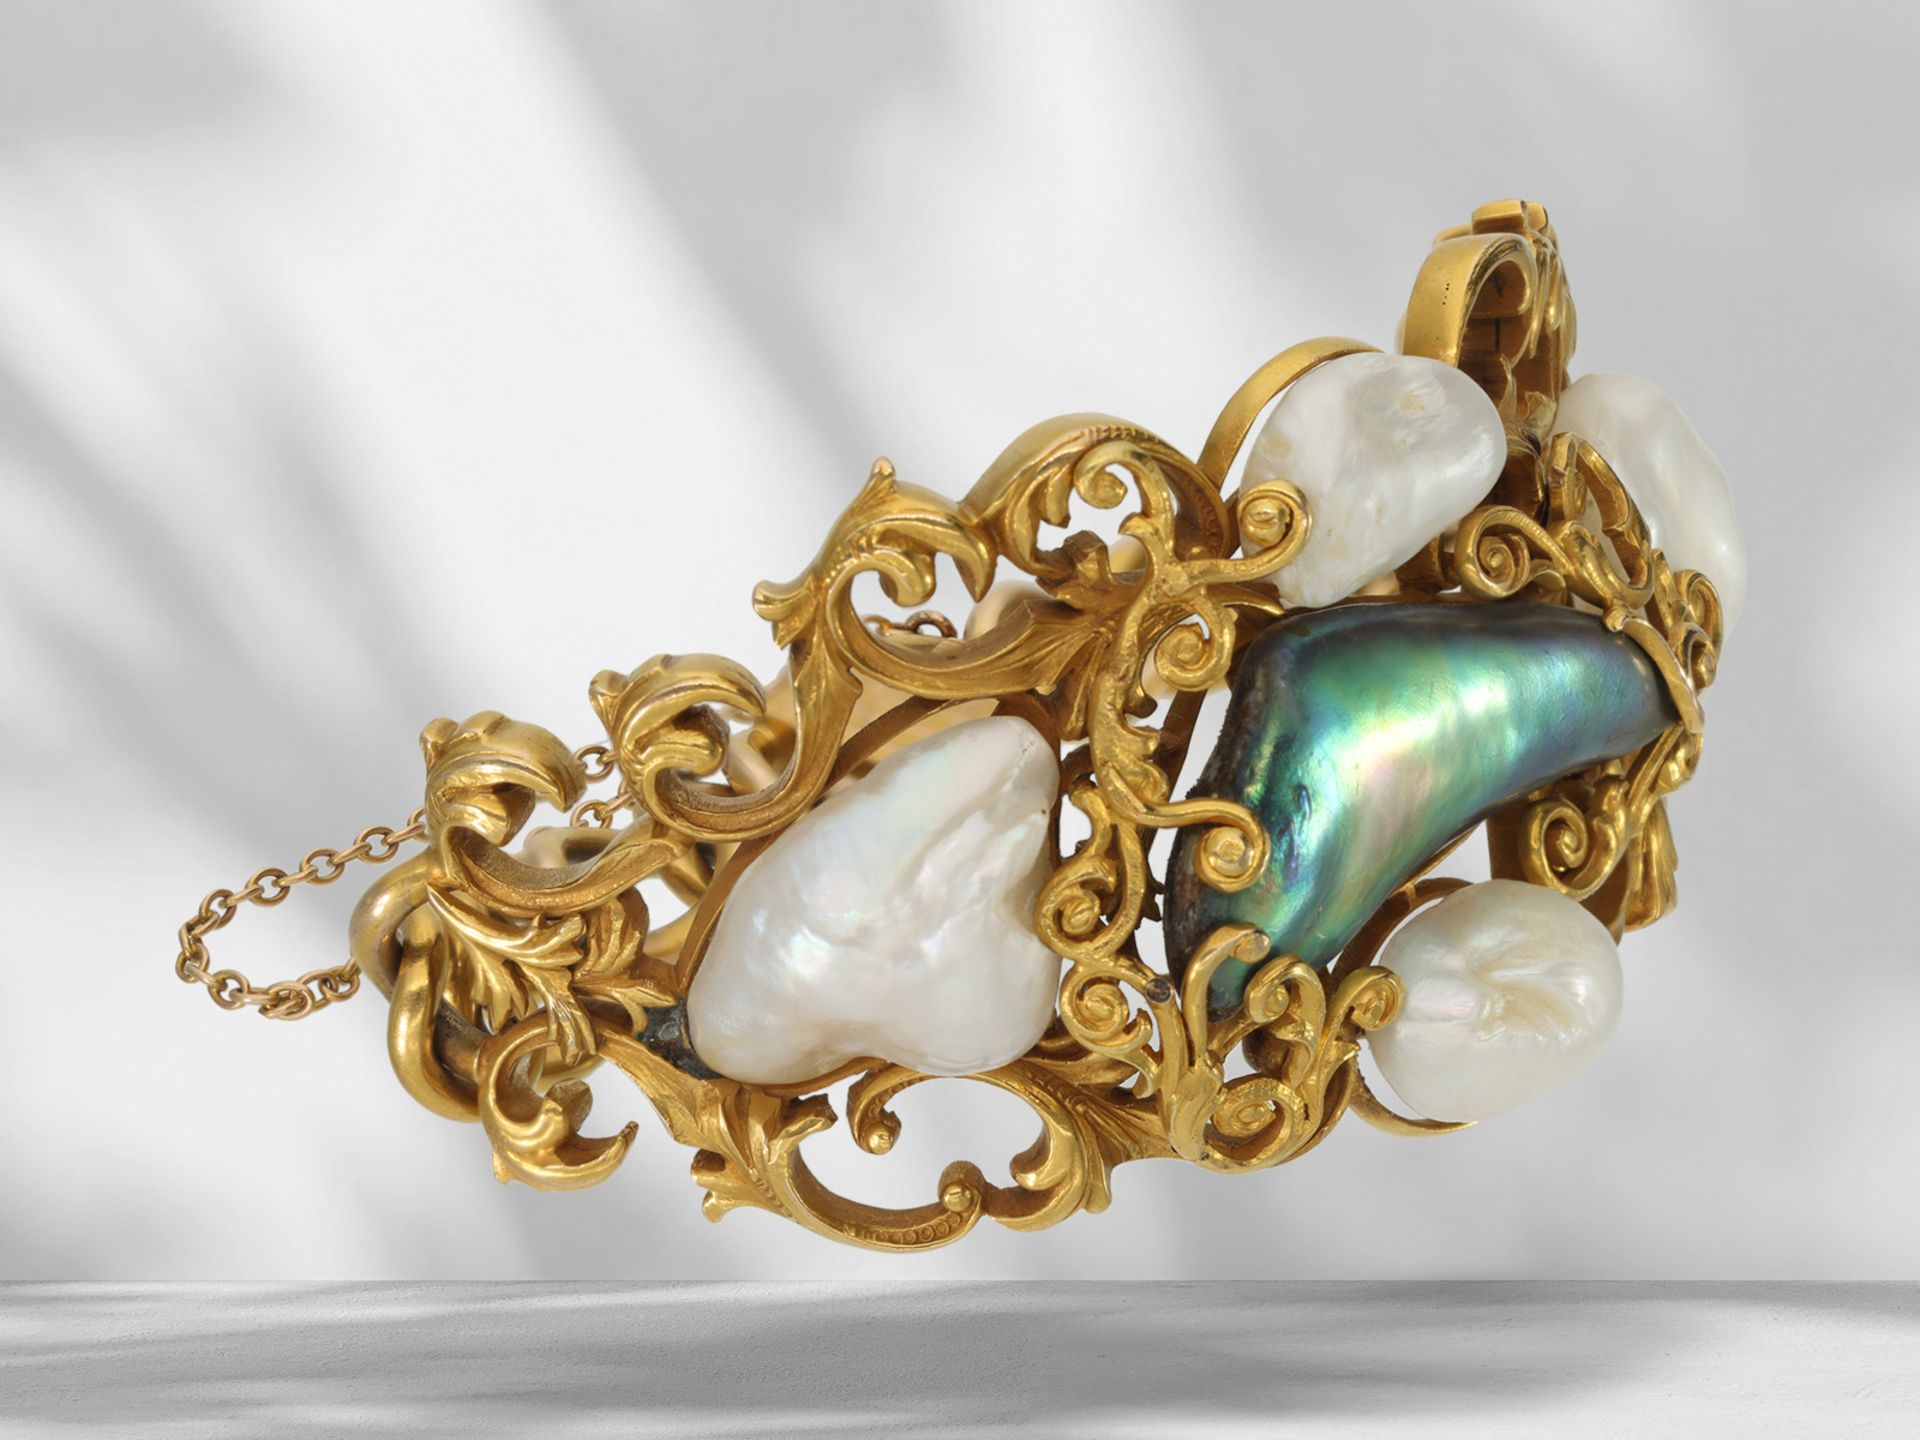 Bracelet: interesting and very unusual antique bracelet/bangle with rare baroque pearls, around 1900 - Image 6 of 7